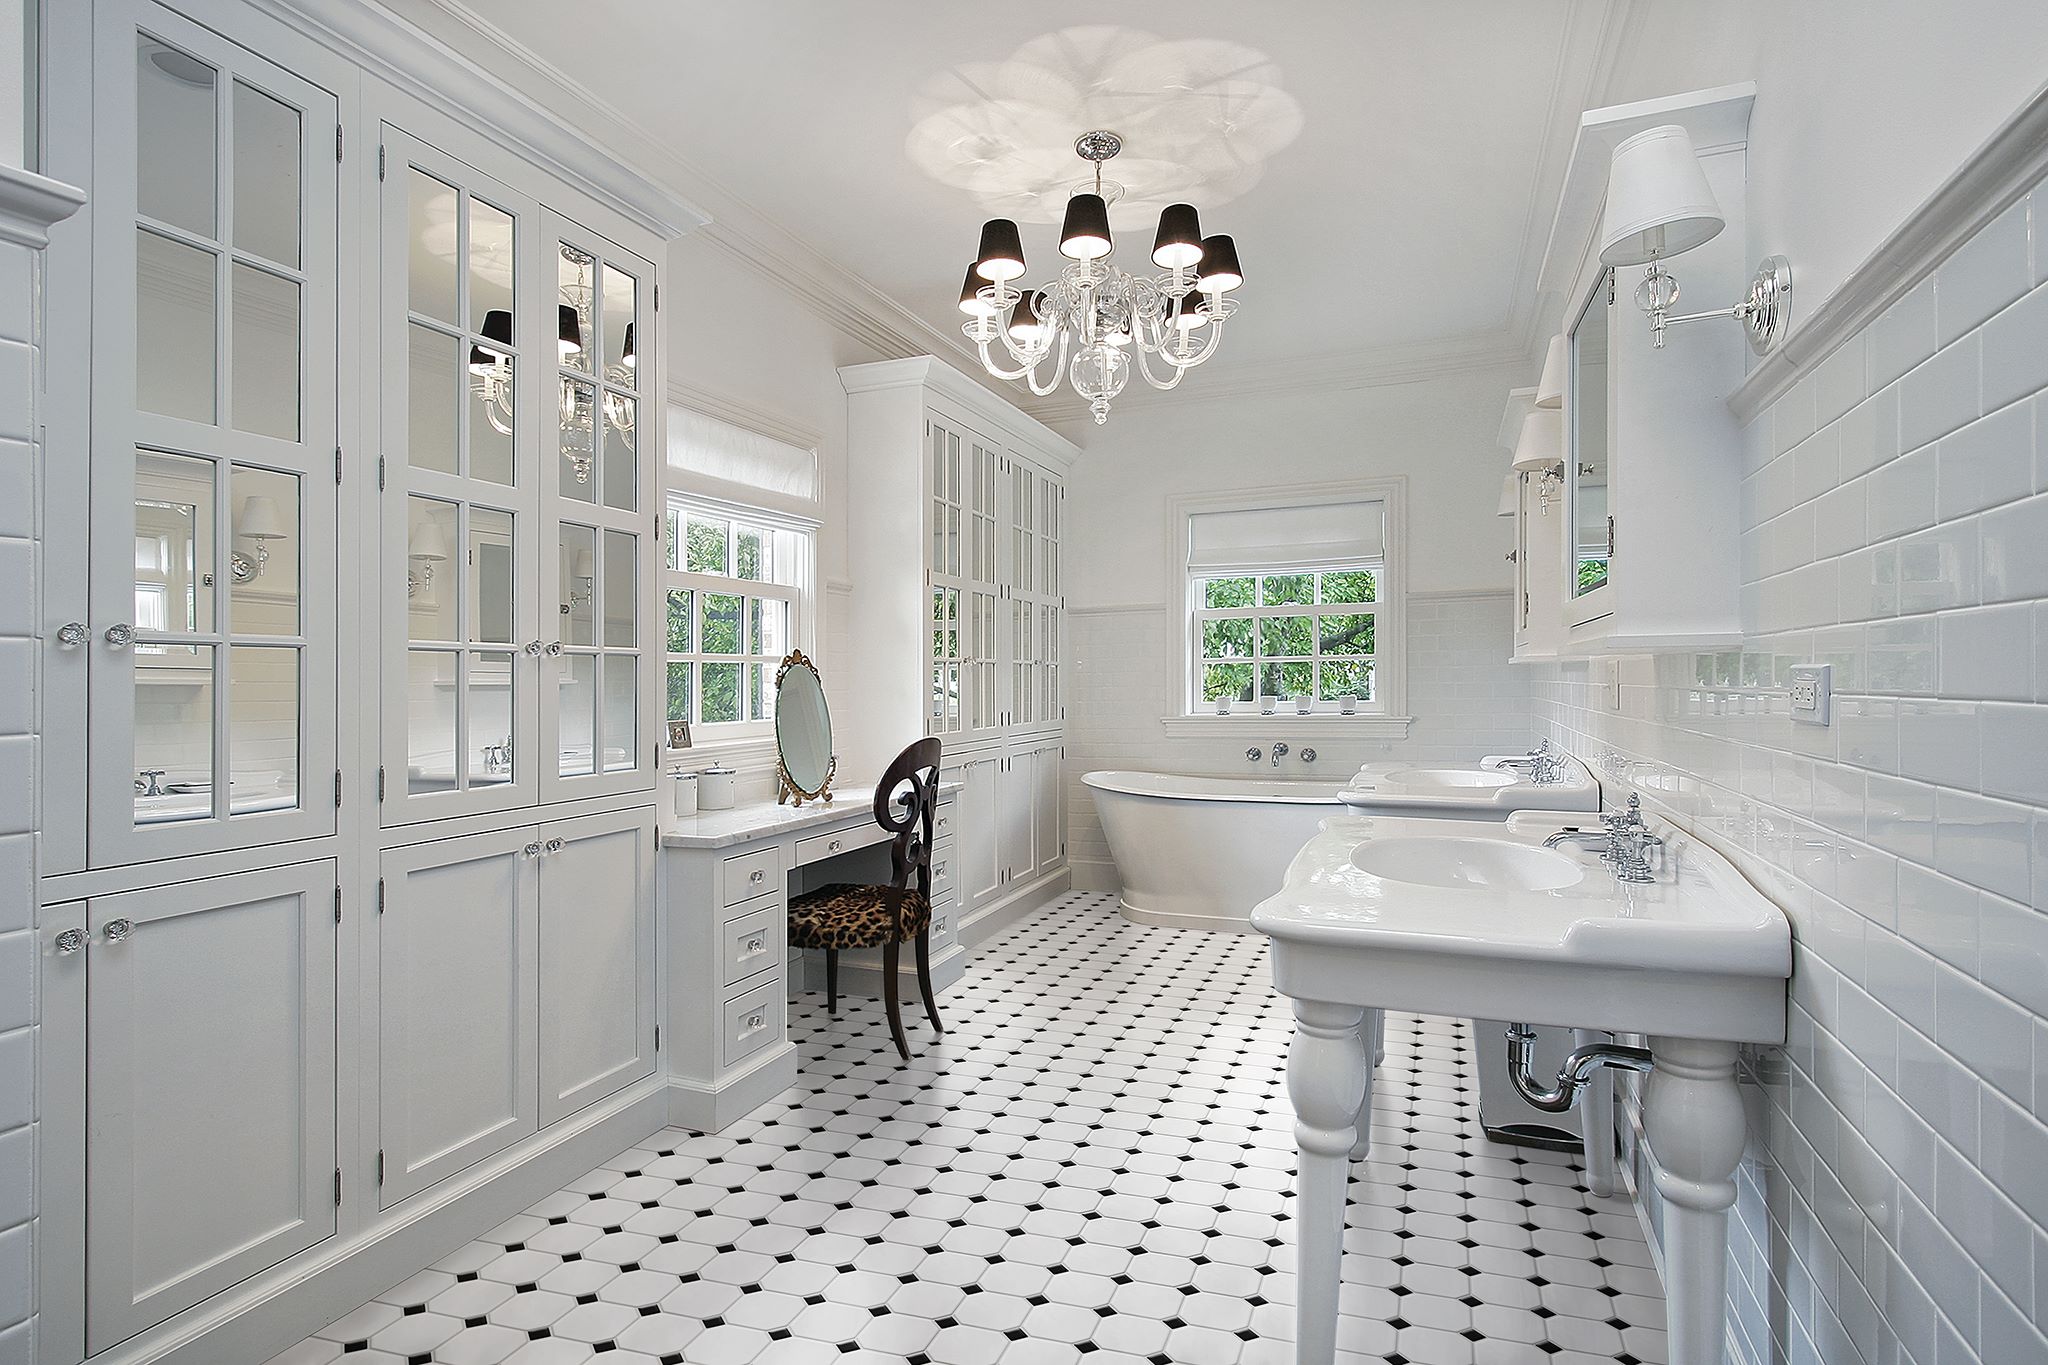 TRADITIONS_2_G | Gemini Tile and Marble